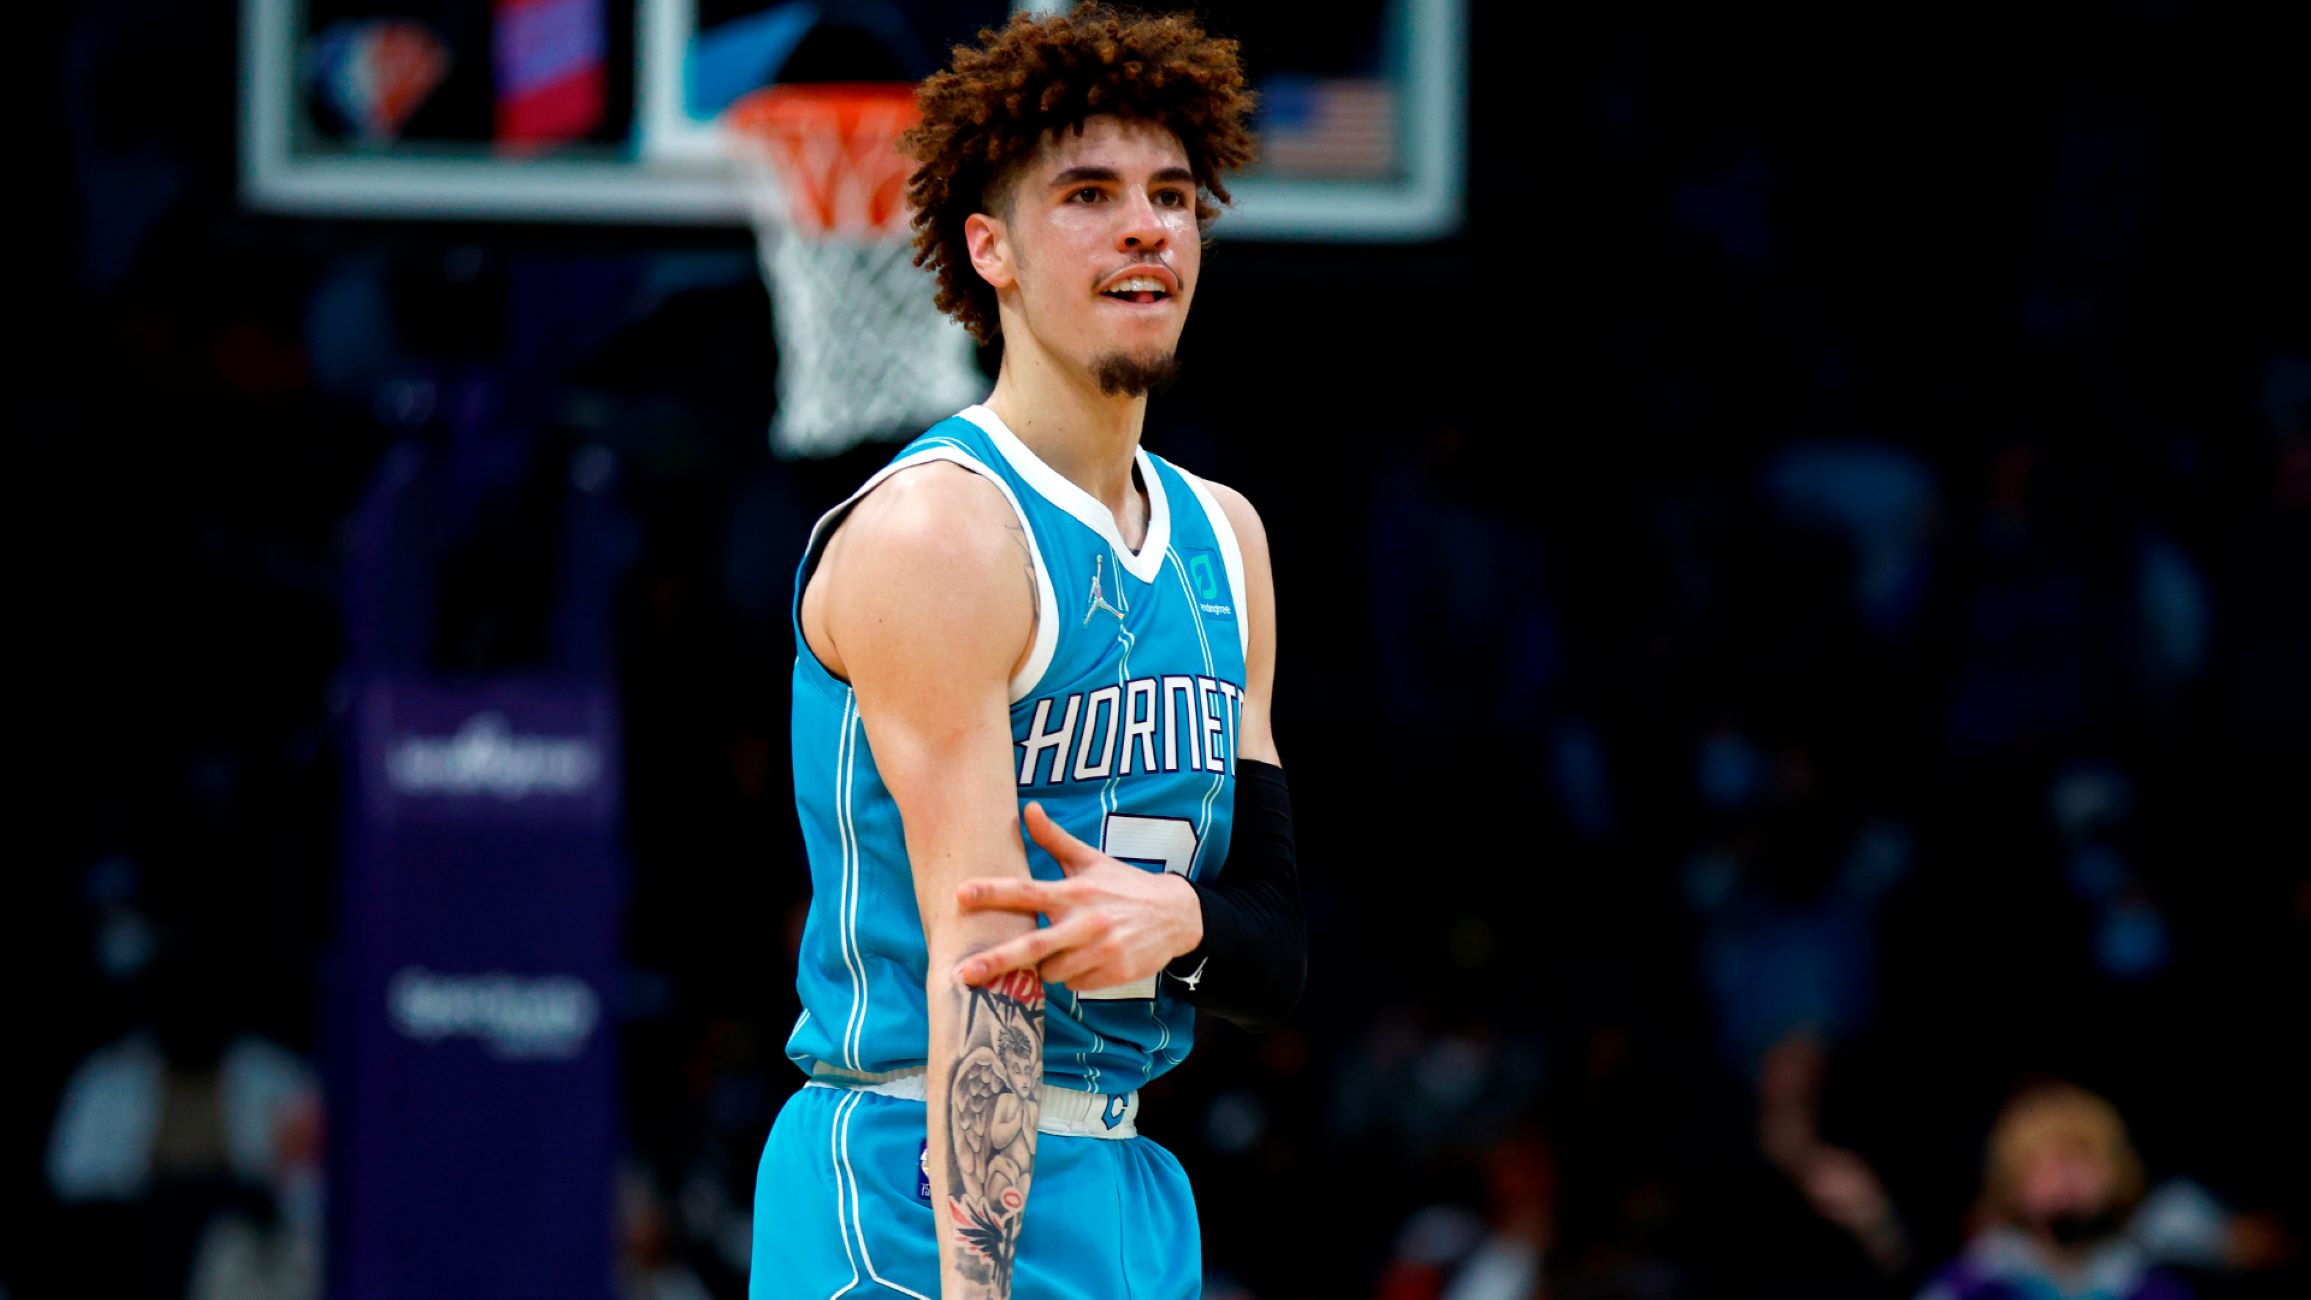 lamelo-ball-shows-off-new-tattoos-including-clothing-line-logo-on-neck